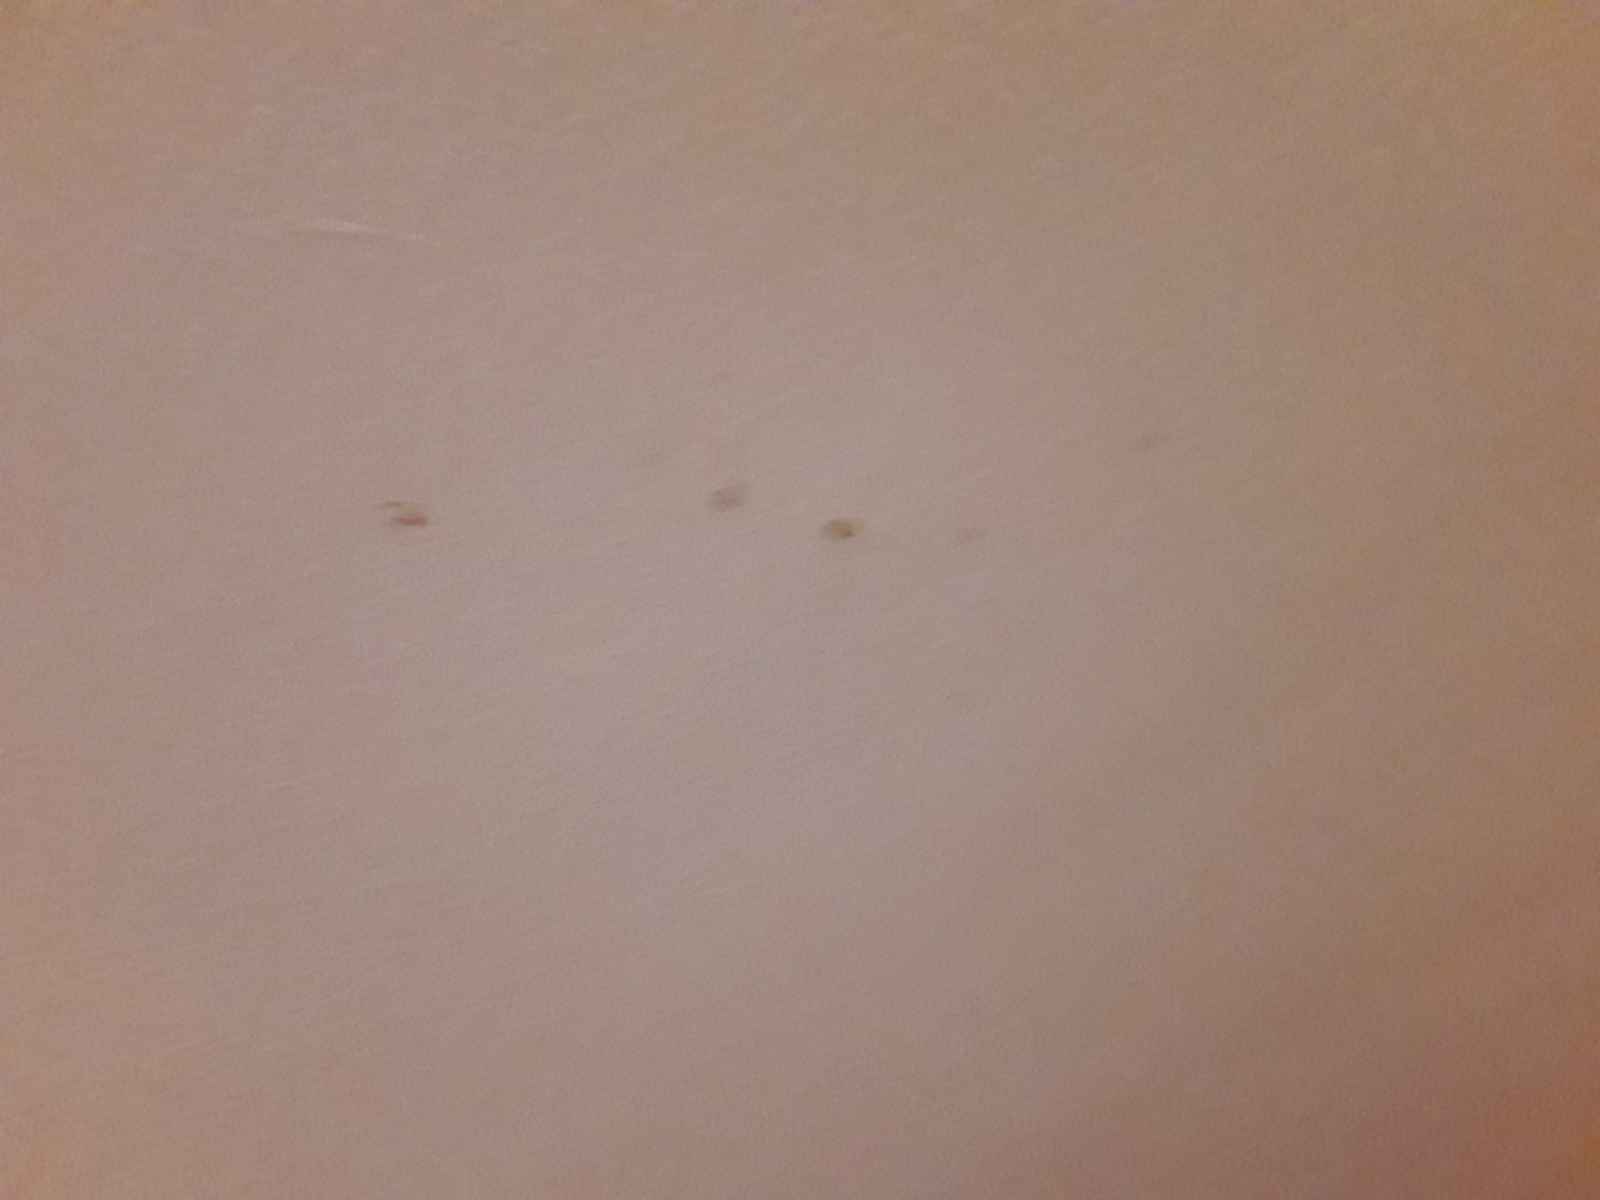 blood on the walls for 3 months